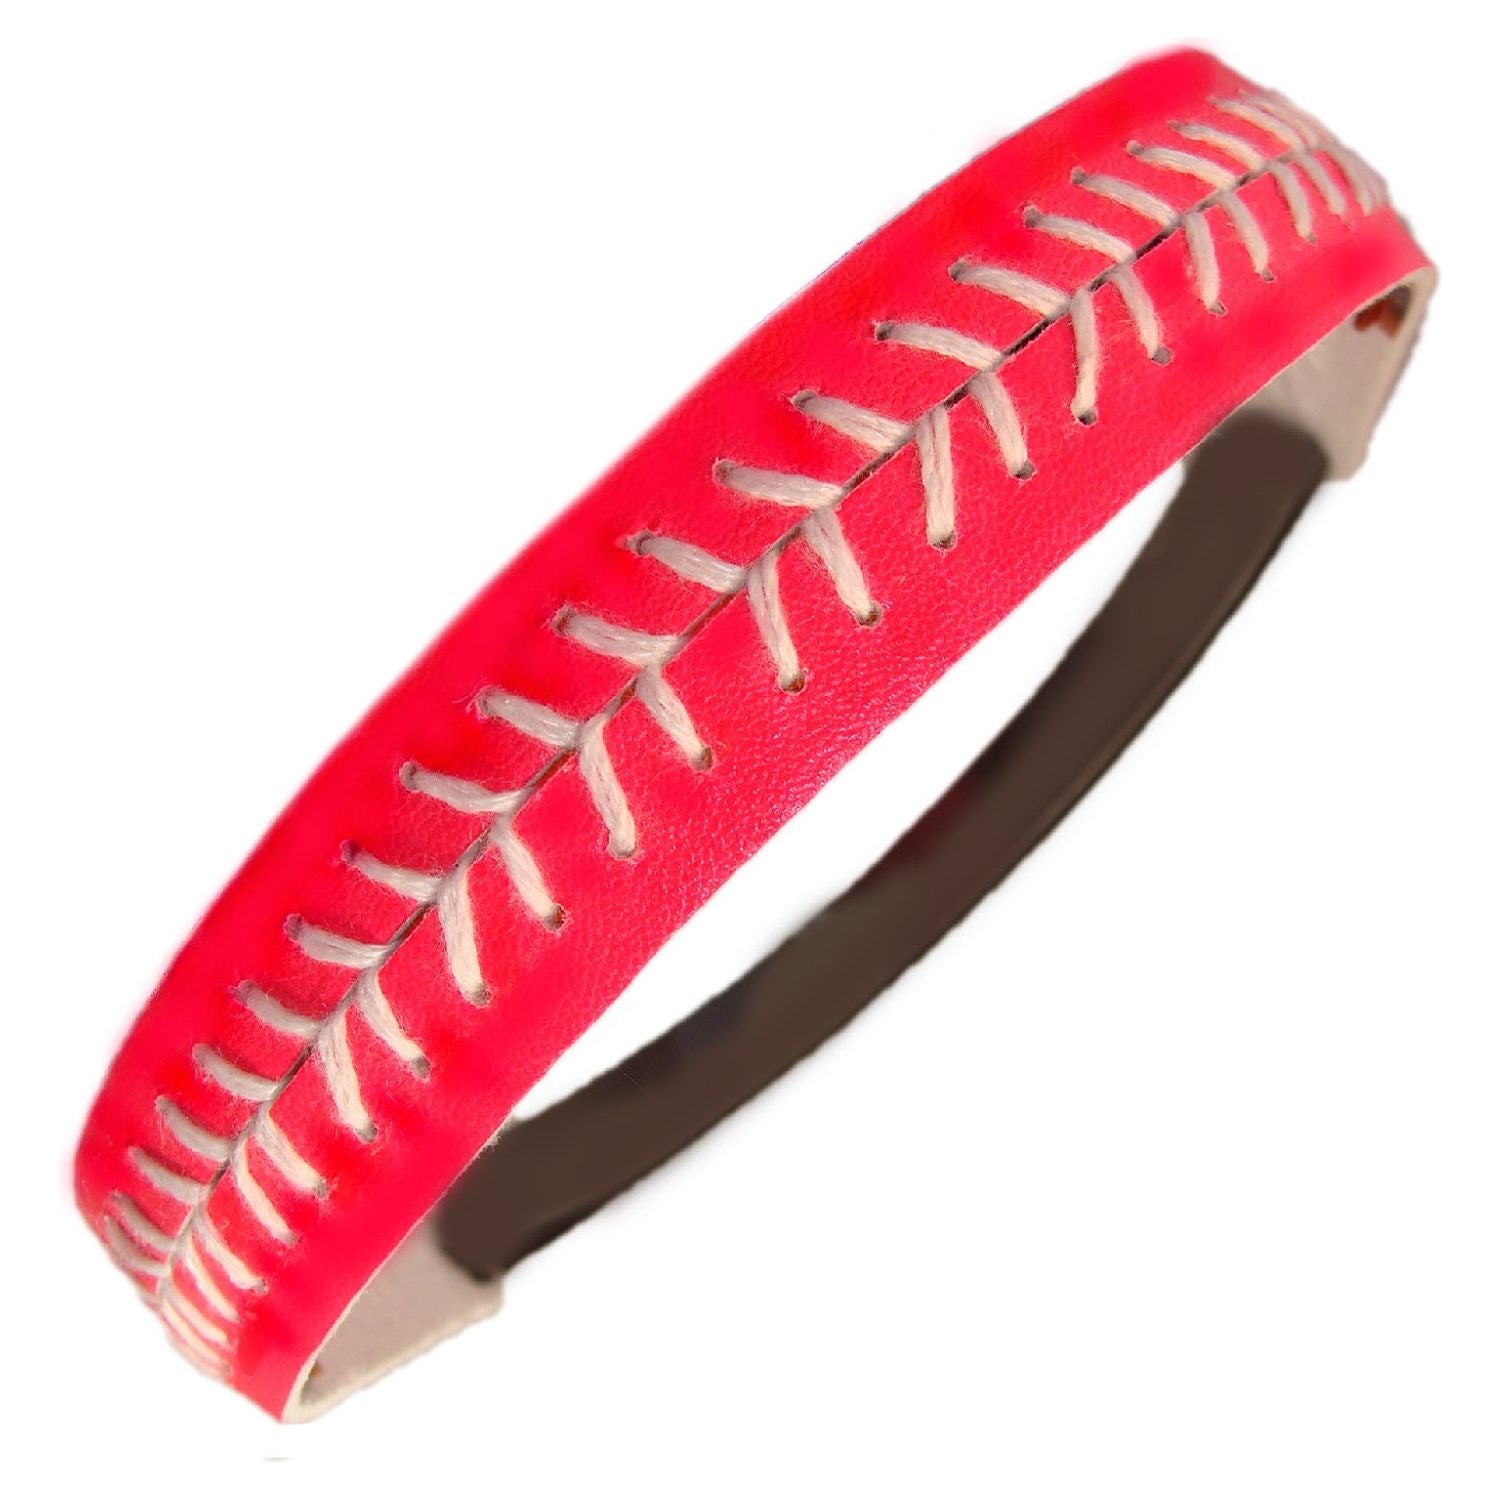 LS BASEBALL 2.5 TRADITIONAL WRIST BAND IN Pink - Lanctôt Team Sports